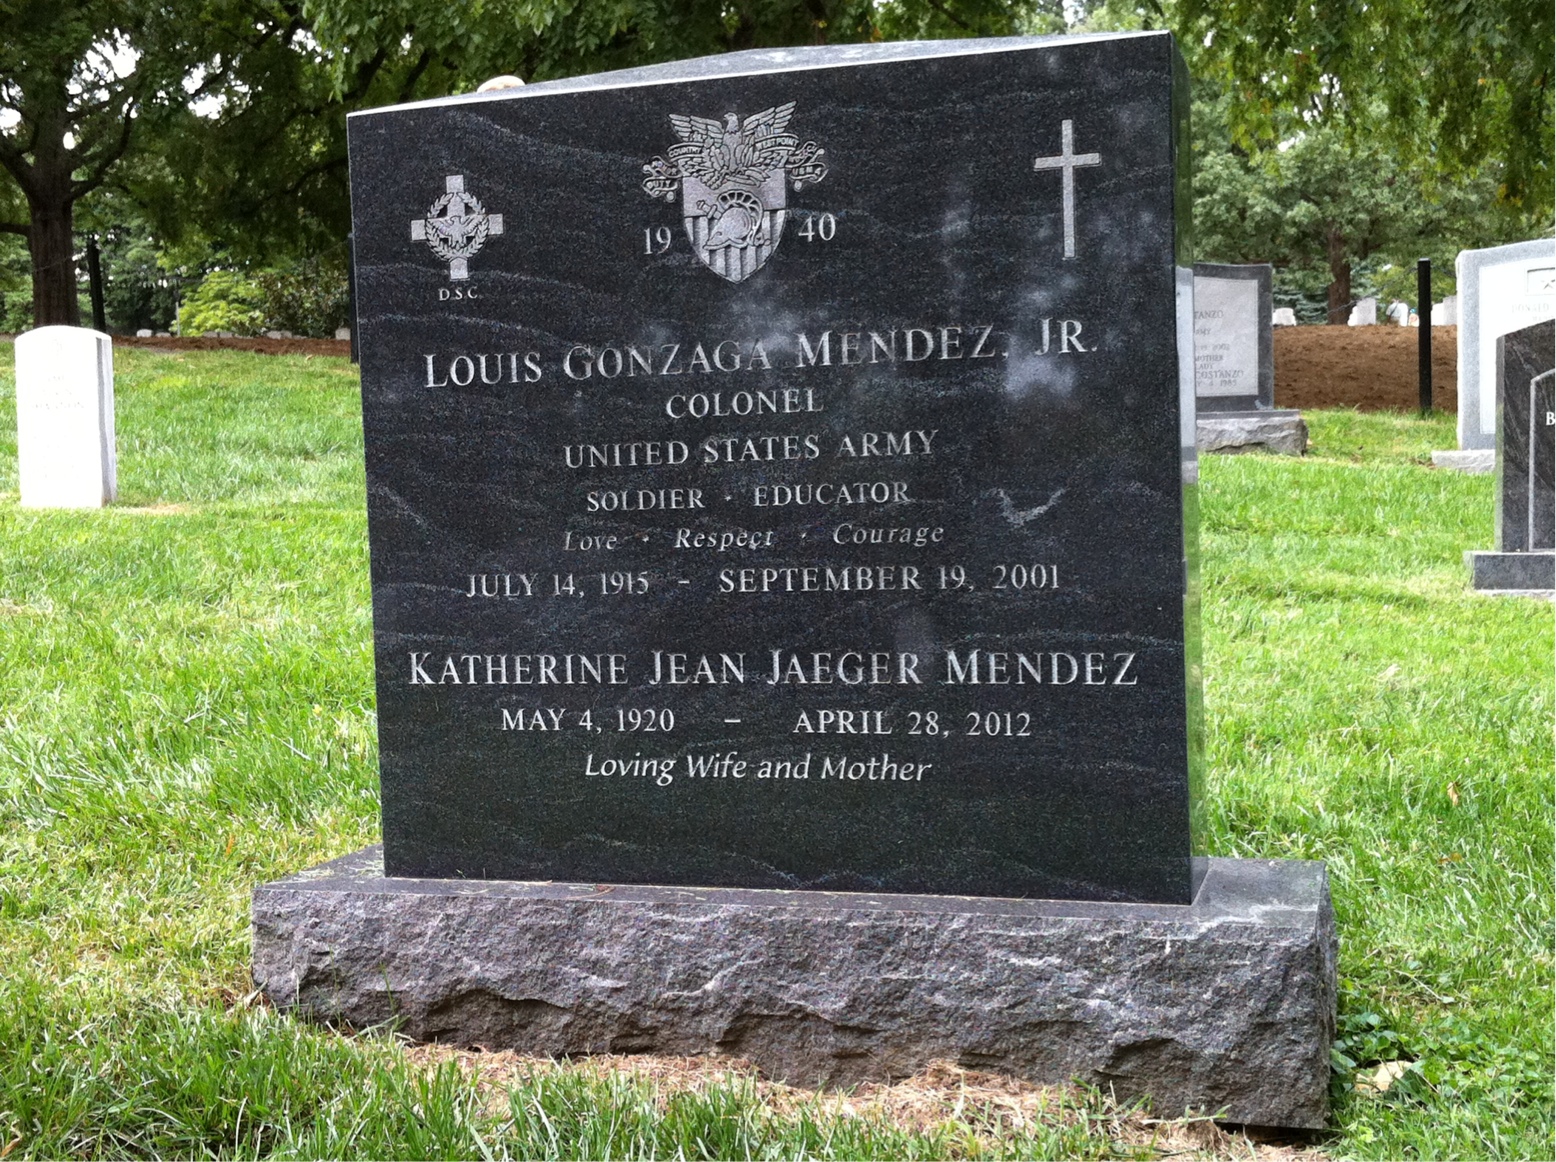 Gravestone of Colonel Louis Gonzaga Mendez, one of the notable Hispanic Americans buried at Arlington National Cemetery